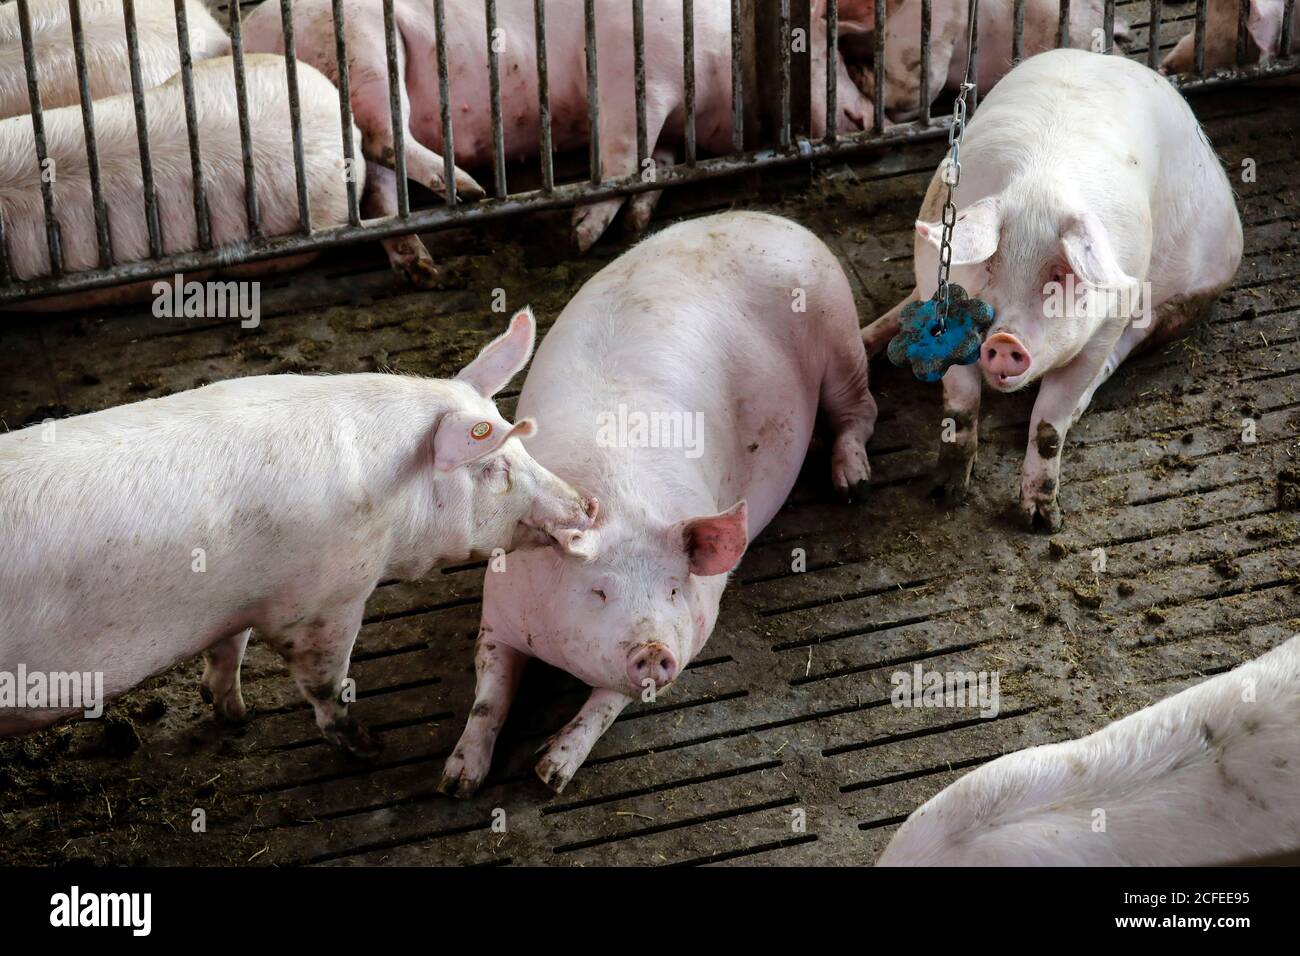 Ense, North Rhine-Westphalia, Germany - Modern fattening stable, the modern pigsty provides more animal welfare, among other things through more Stock Photo